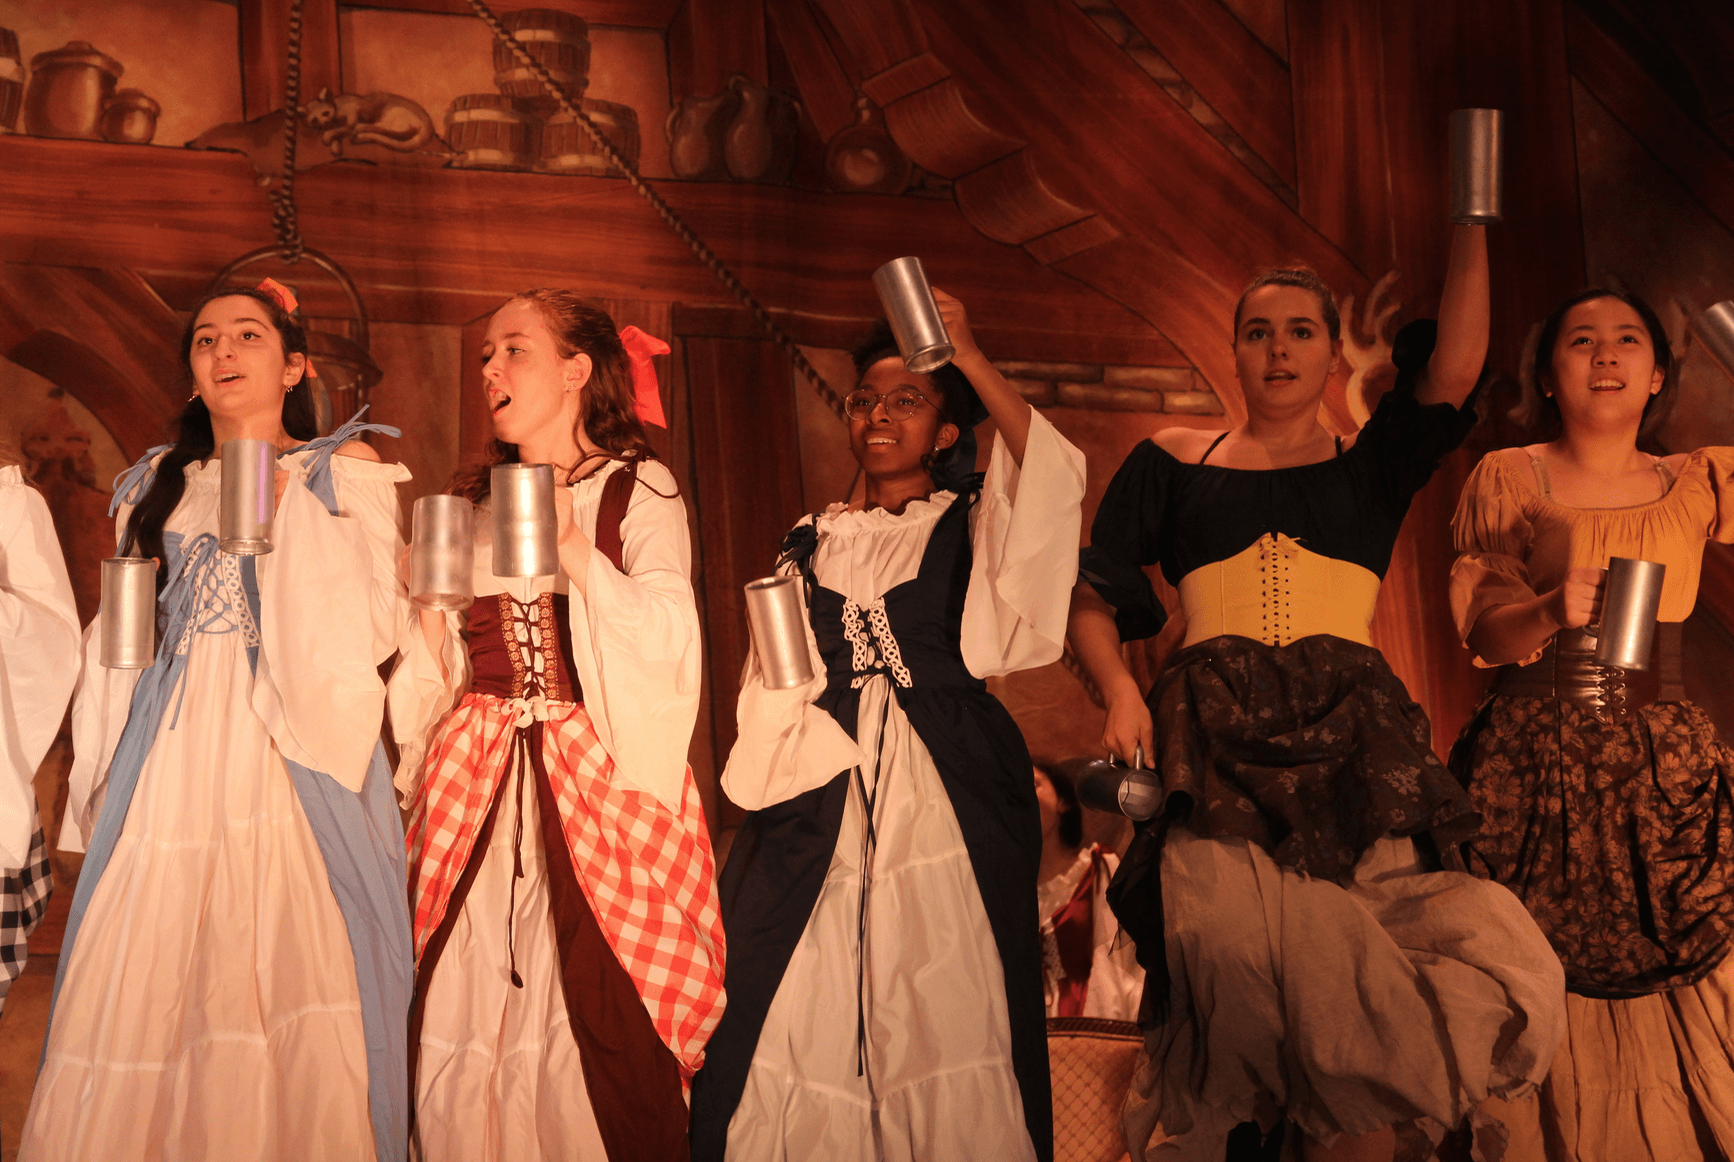 Dress rehearsal of Greenwich High School's production of Beauty & the Beast, May 13, 2019 Photo: Leslie Yager